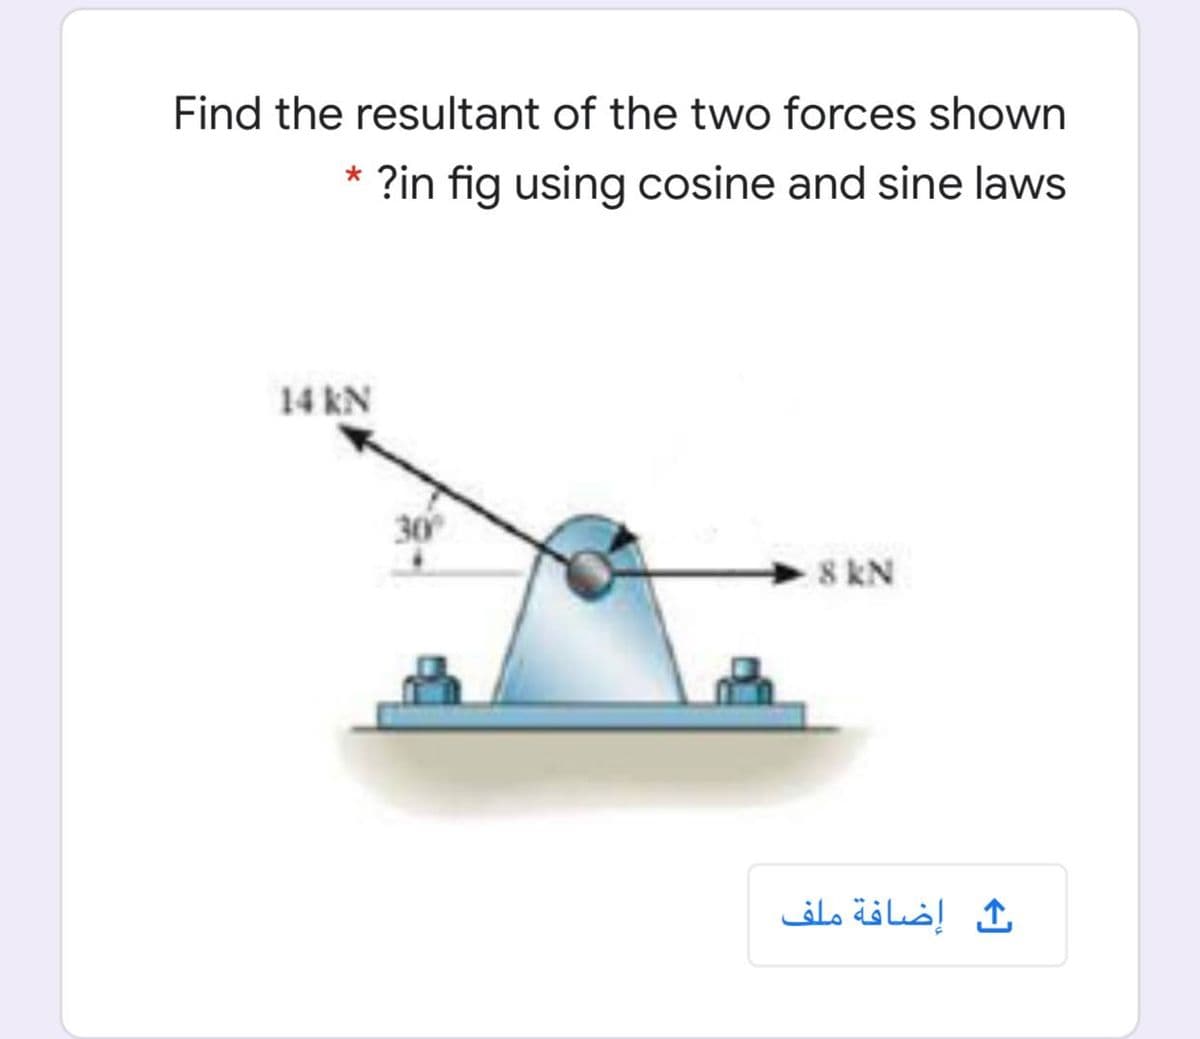 Find the resultant of the two forces shown
* ?in fig using cosine and sine laws
14 kN
30
8 kN
إضافة ملف
